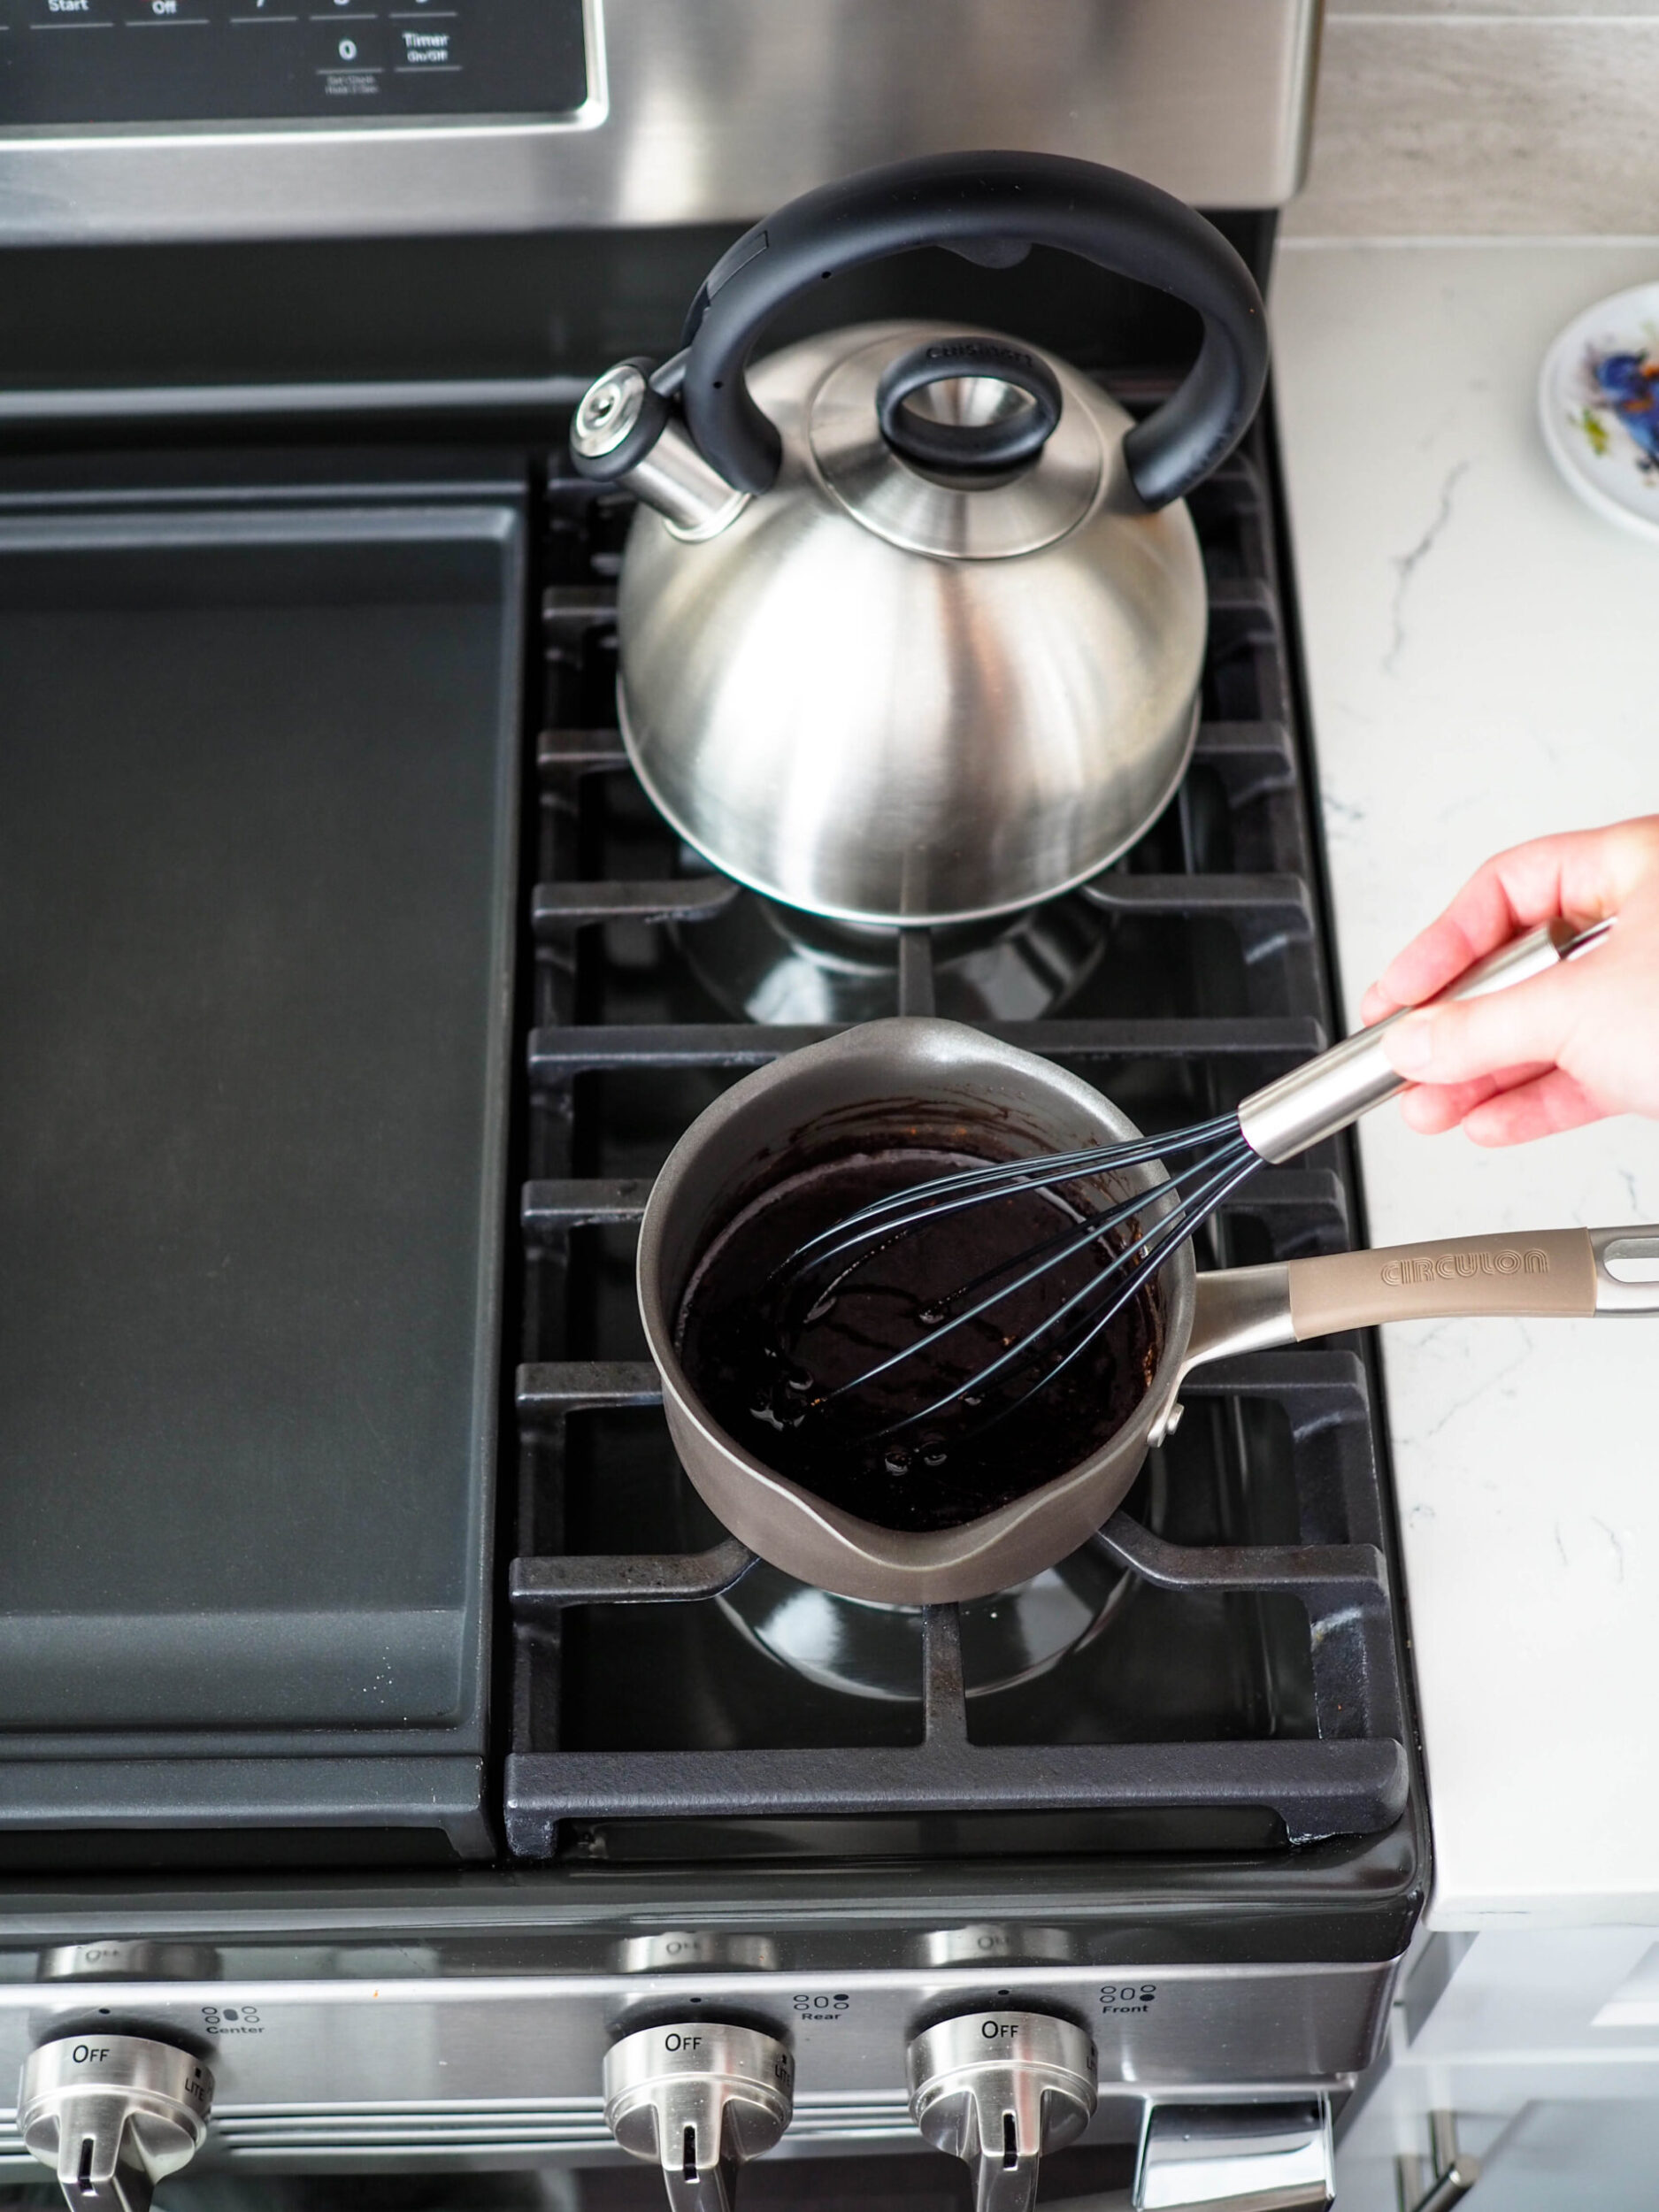 A whisk in a small saucepan filled with dark brown liquid on the stove.